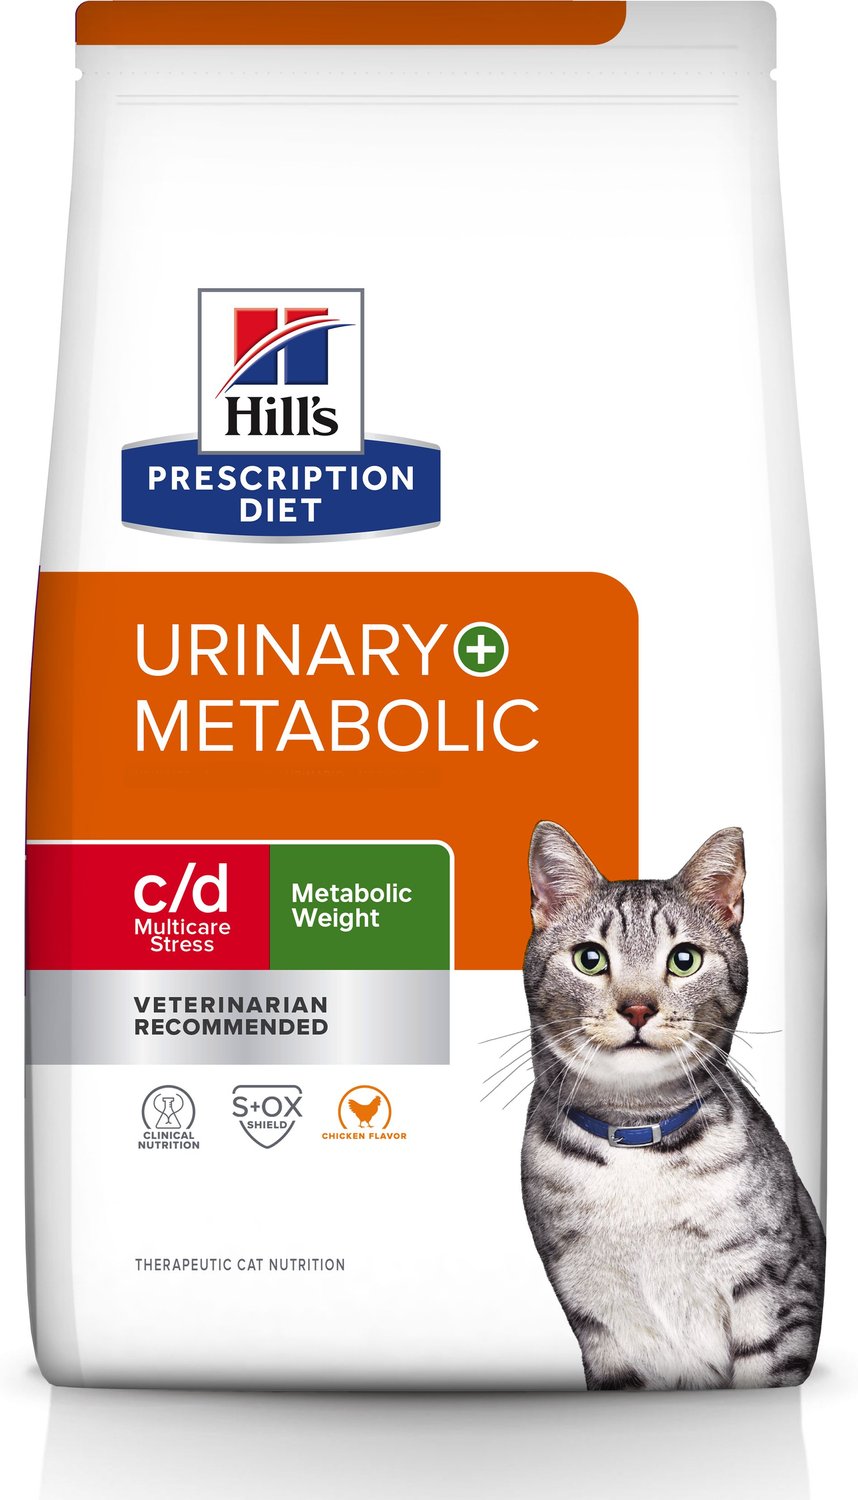 hill's science diet urinary care